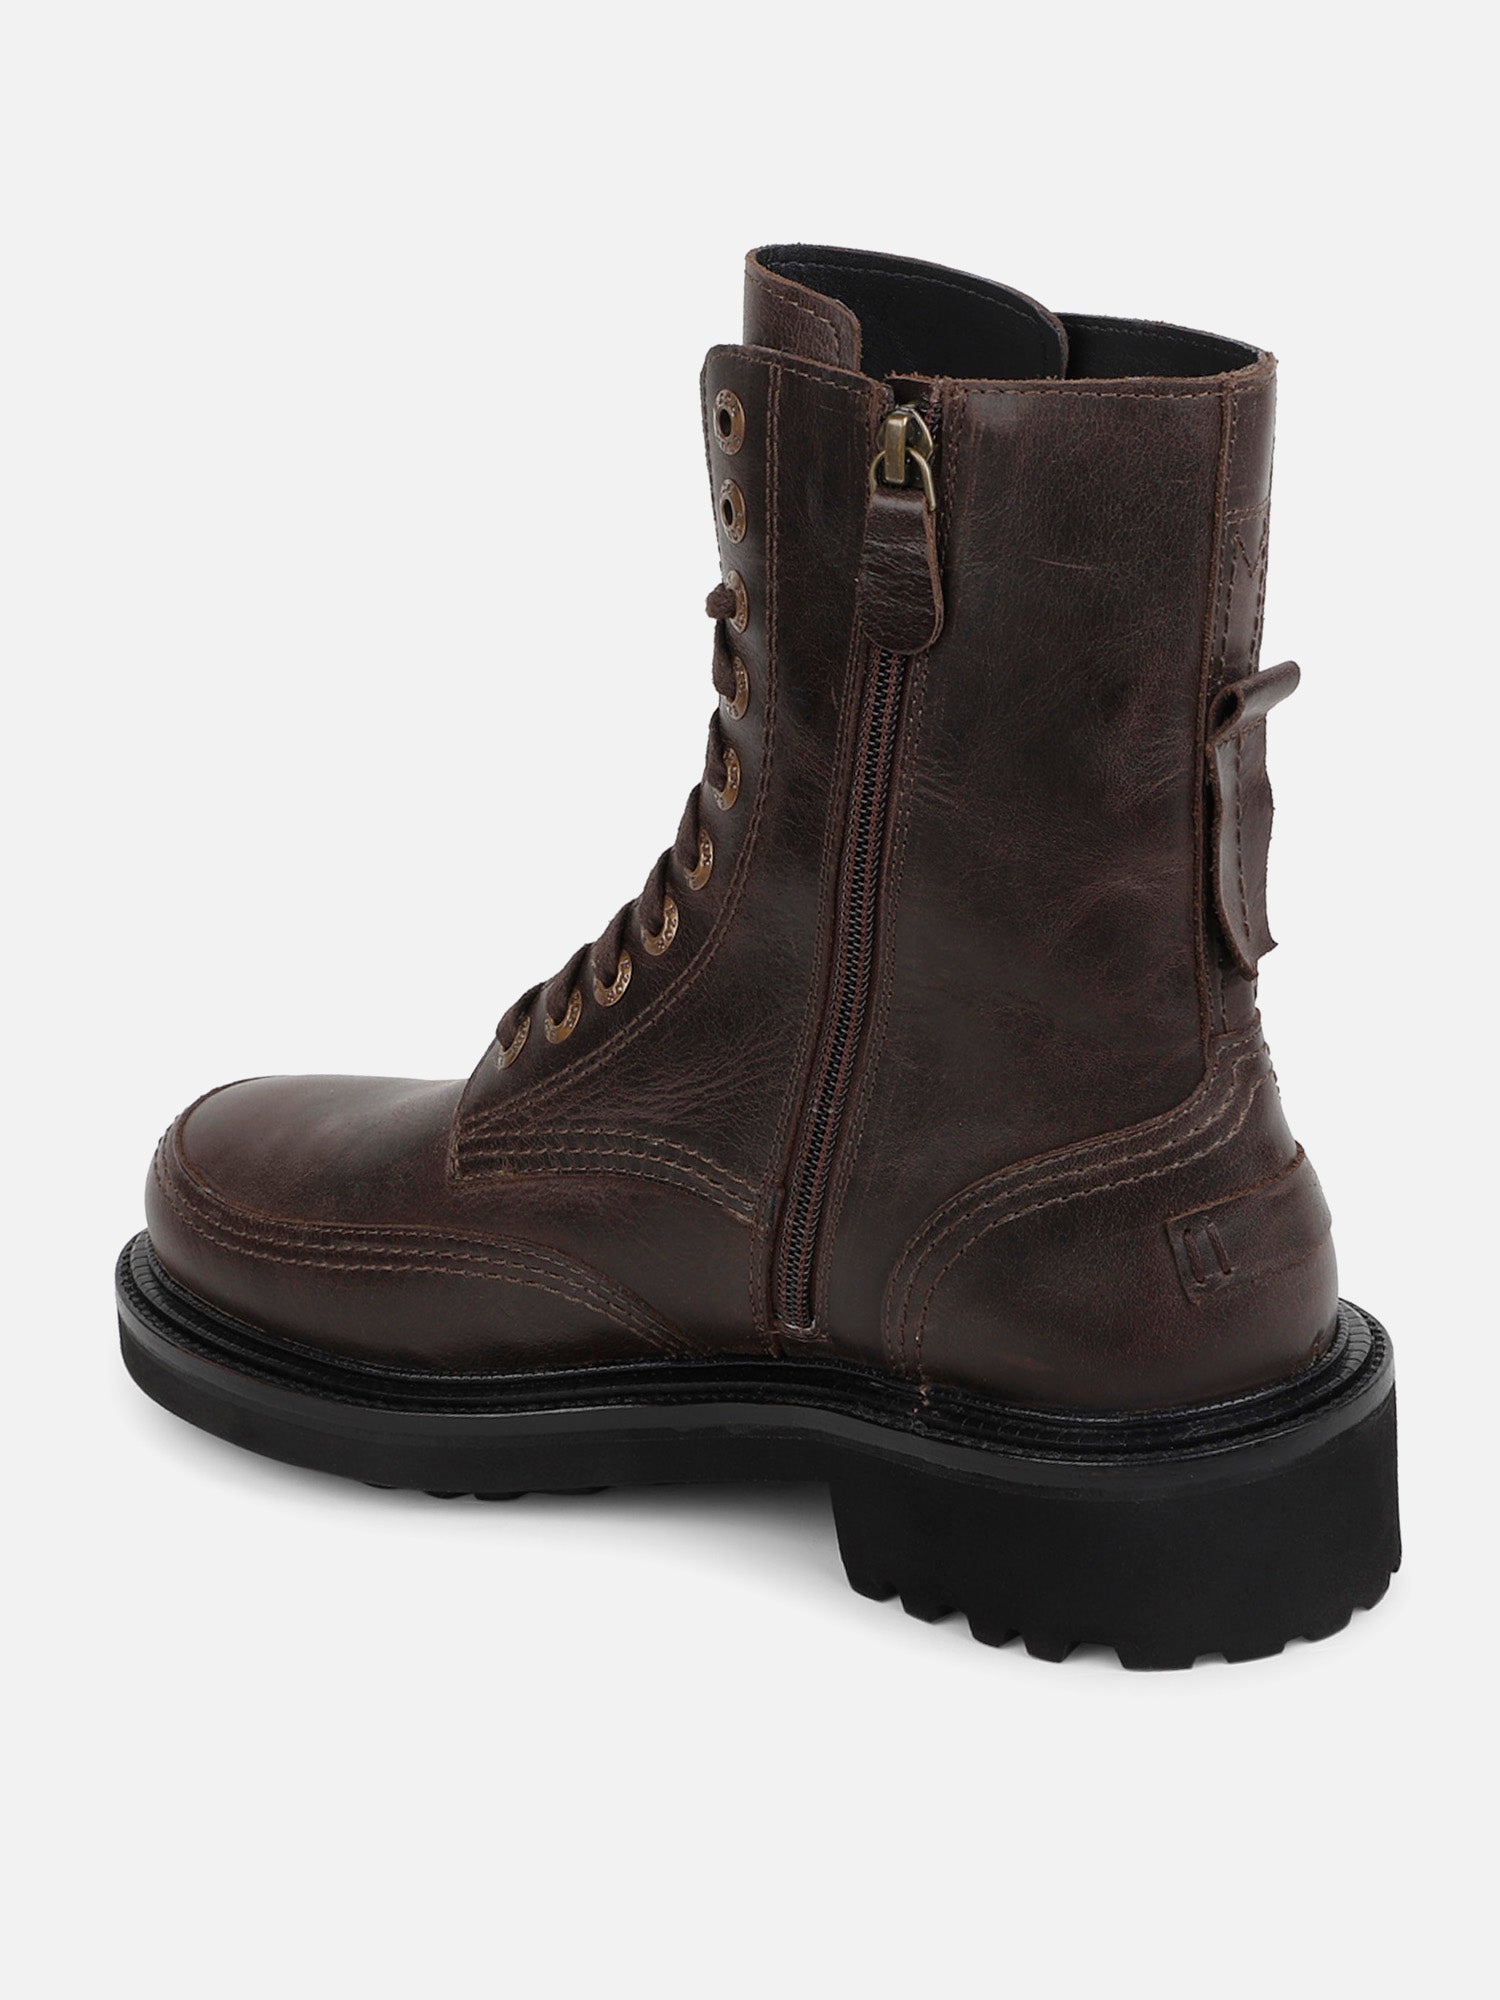 Ezok Brown Lace-ups Leather Boot For Men